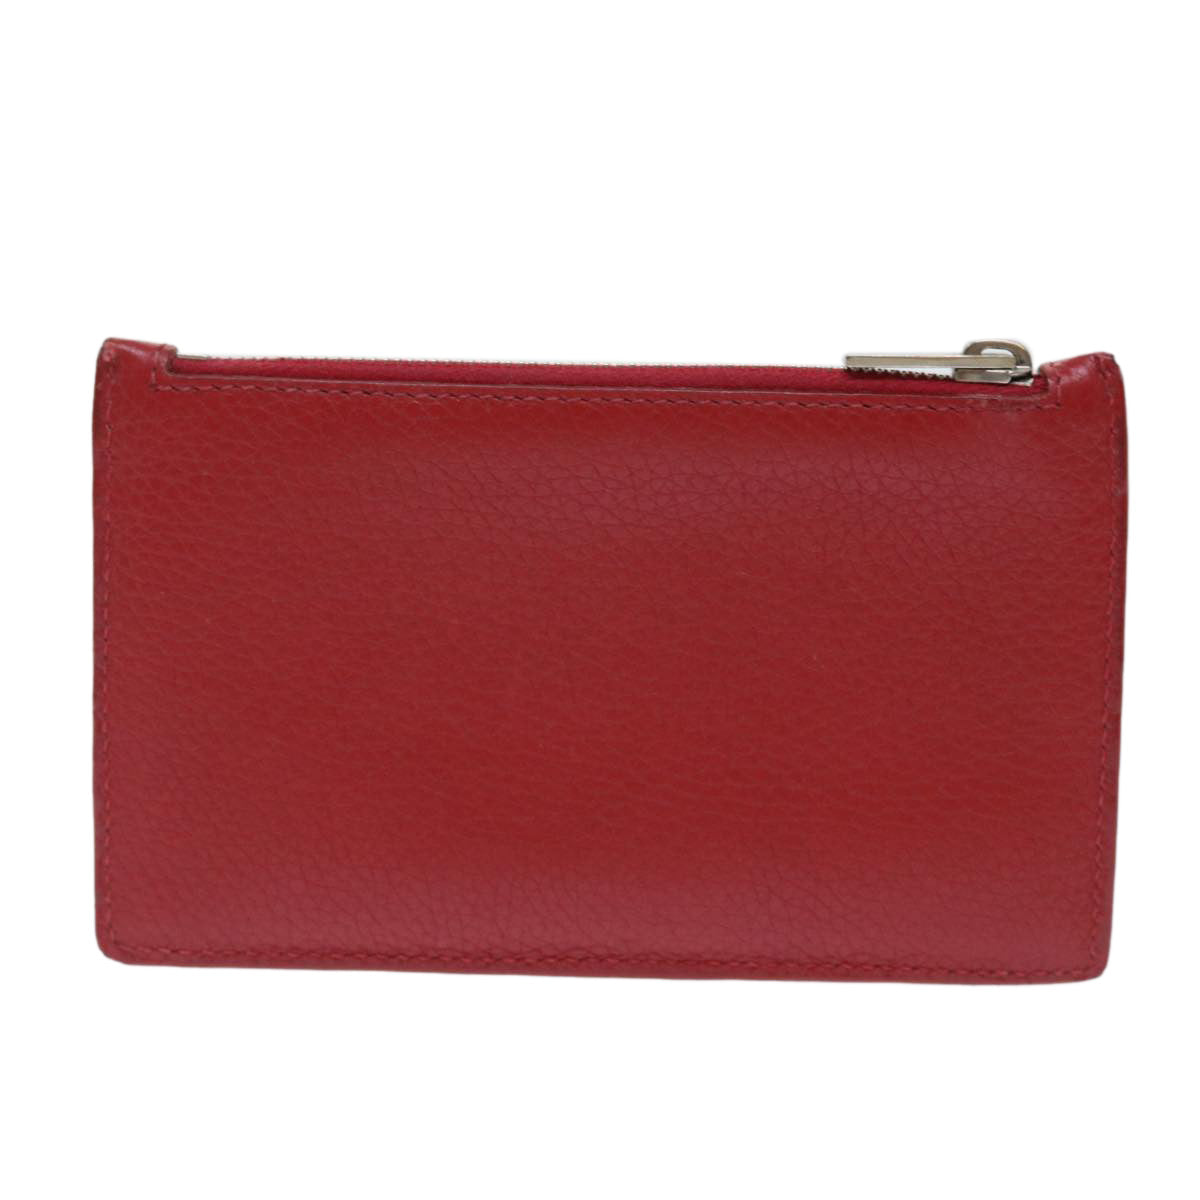 CELINE Coin Purse Leather Red Auth 50848 - 0